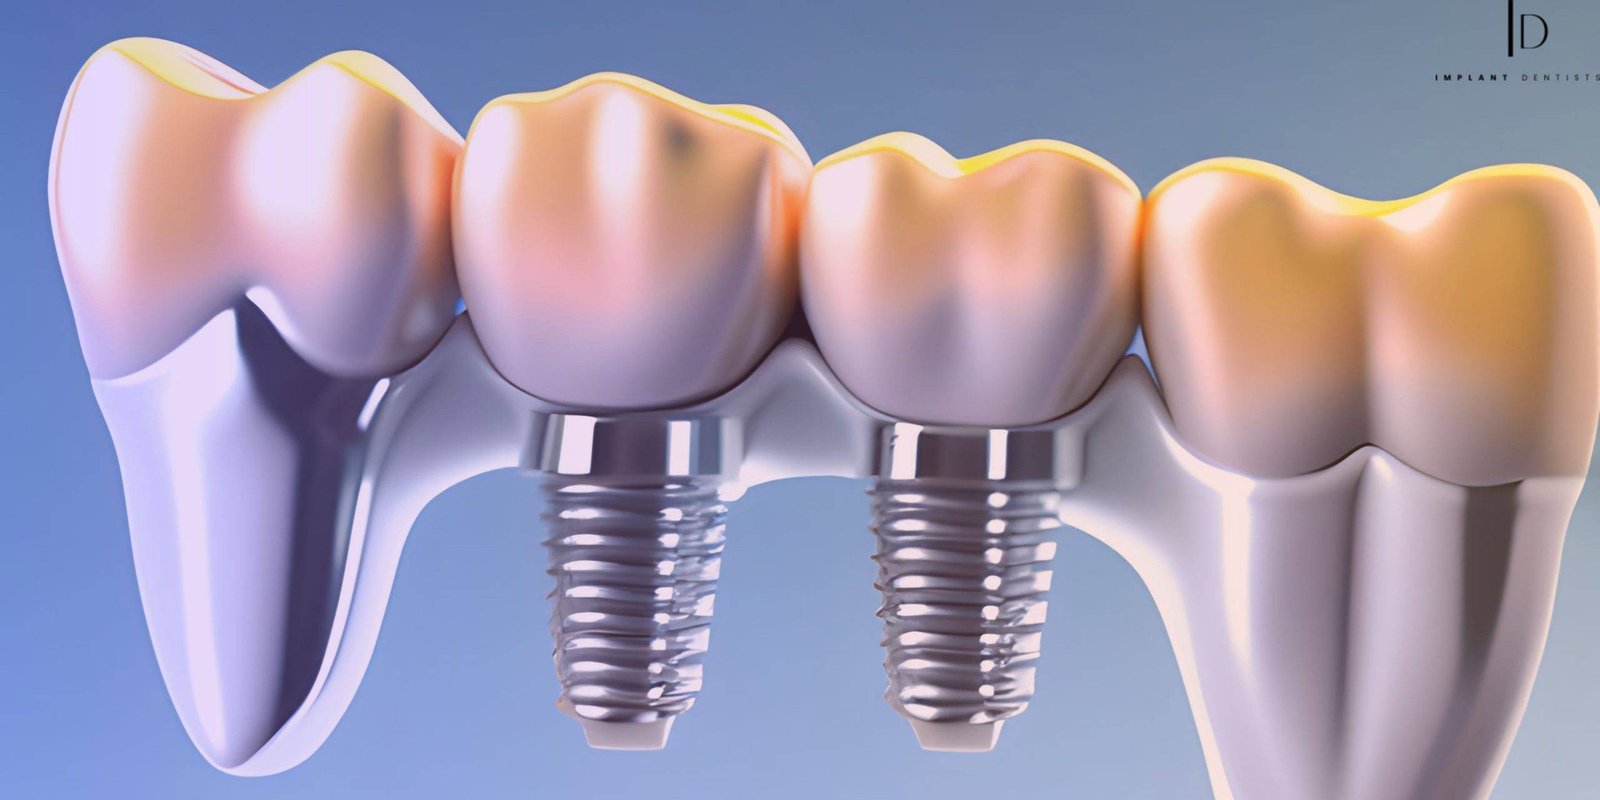 Are Dental Implants Best for You? Factors to Consider Before Making a Decision